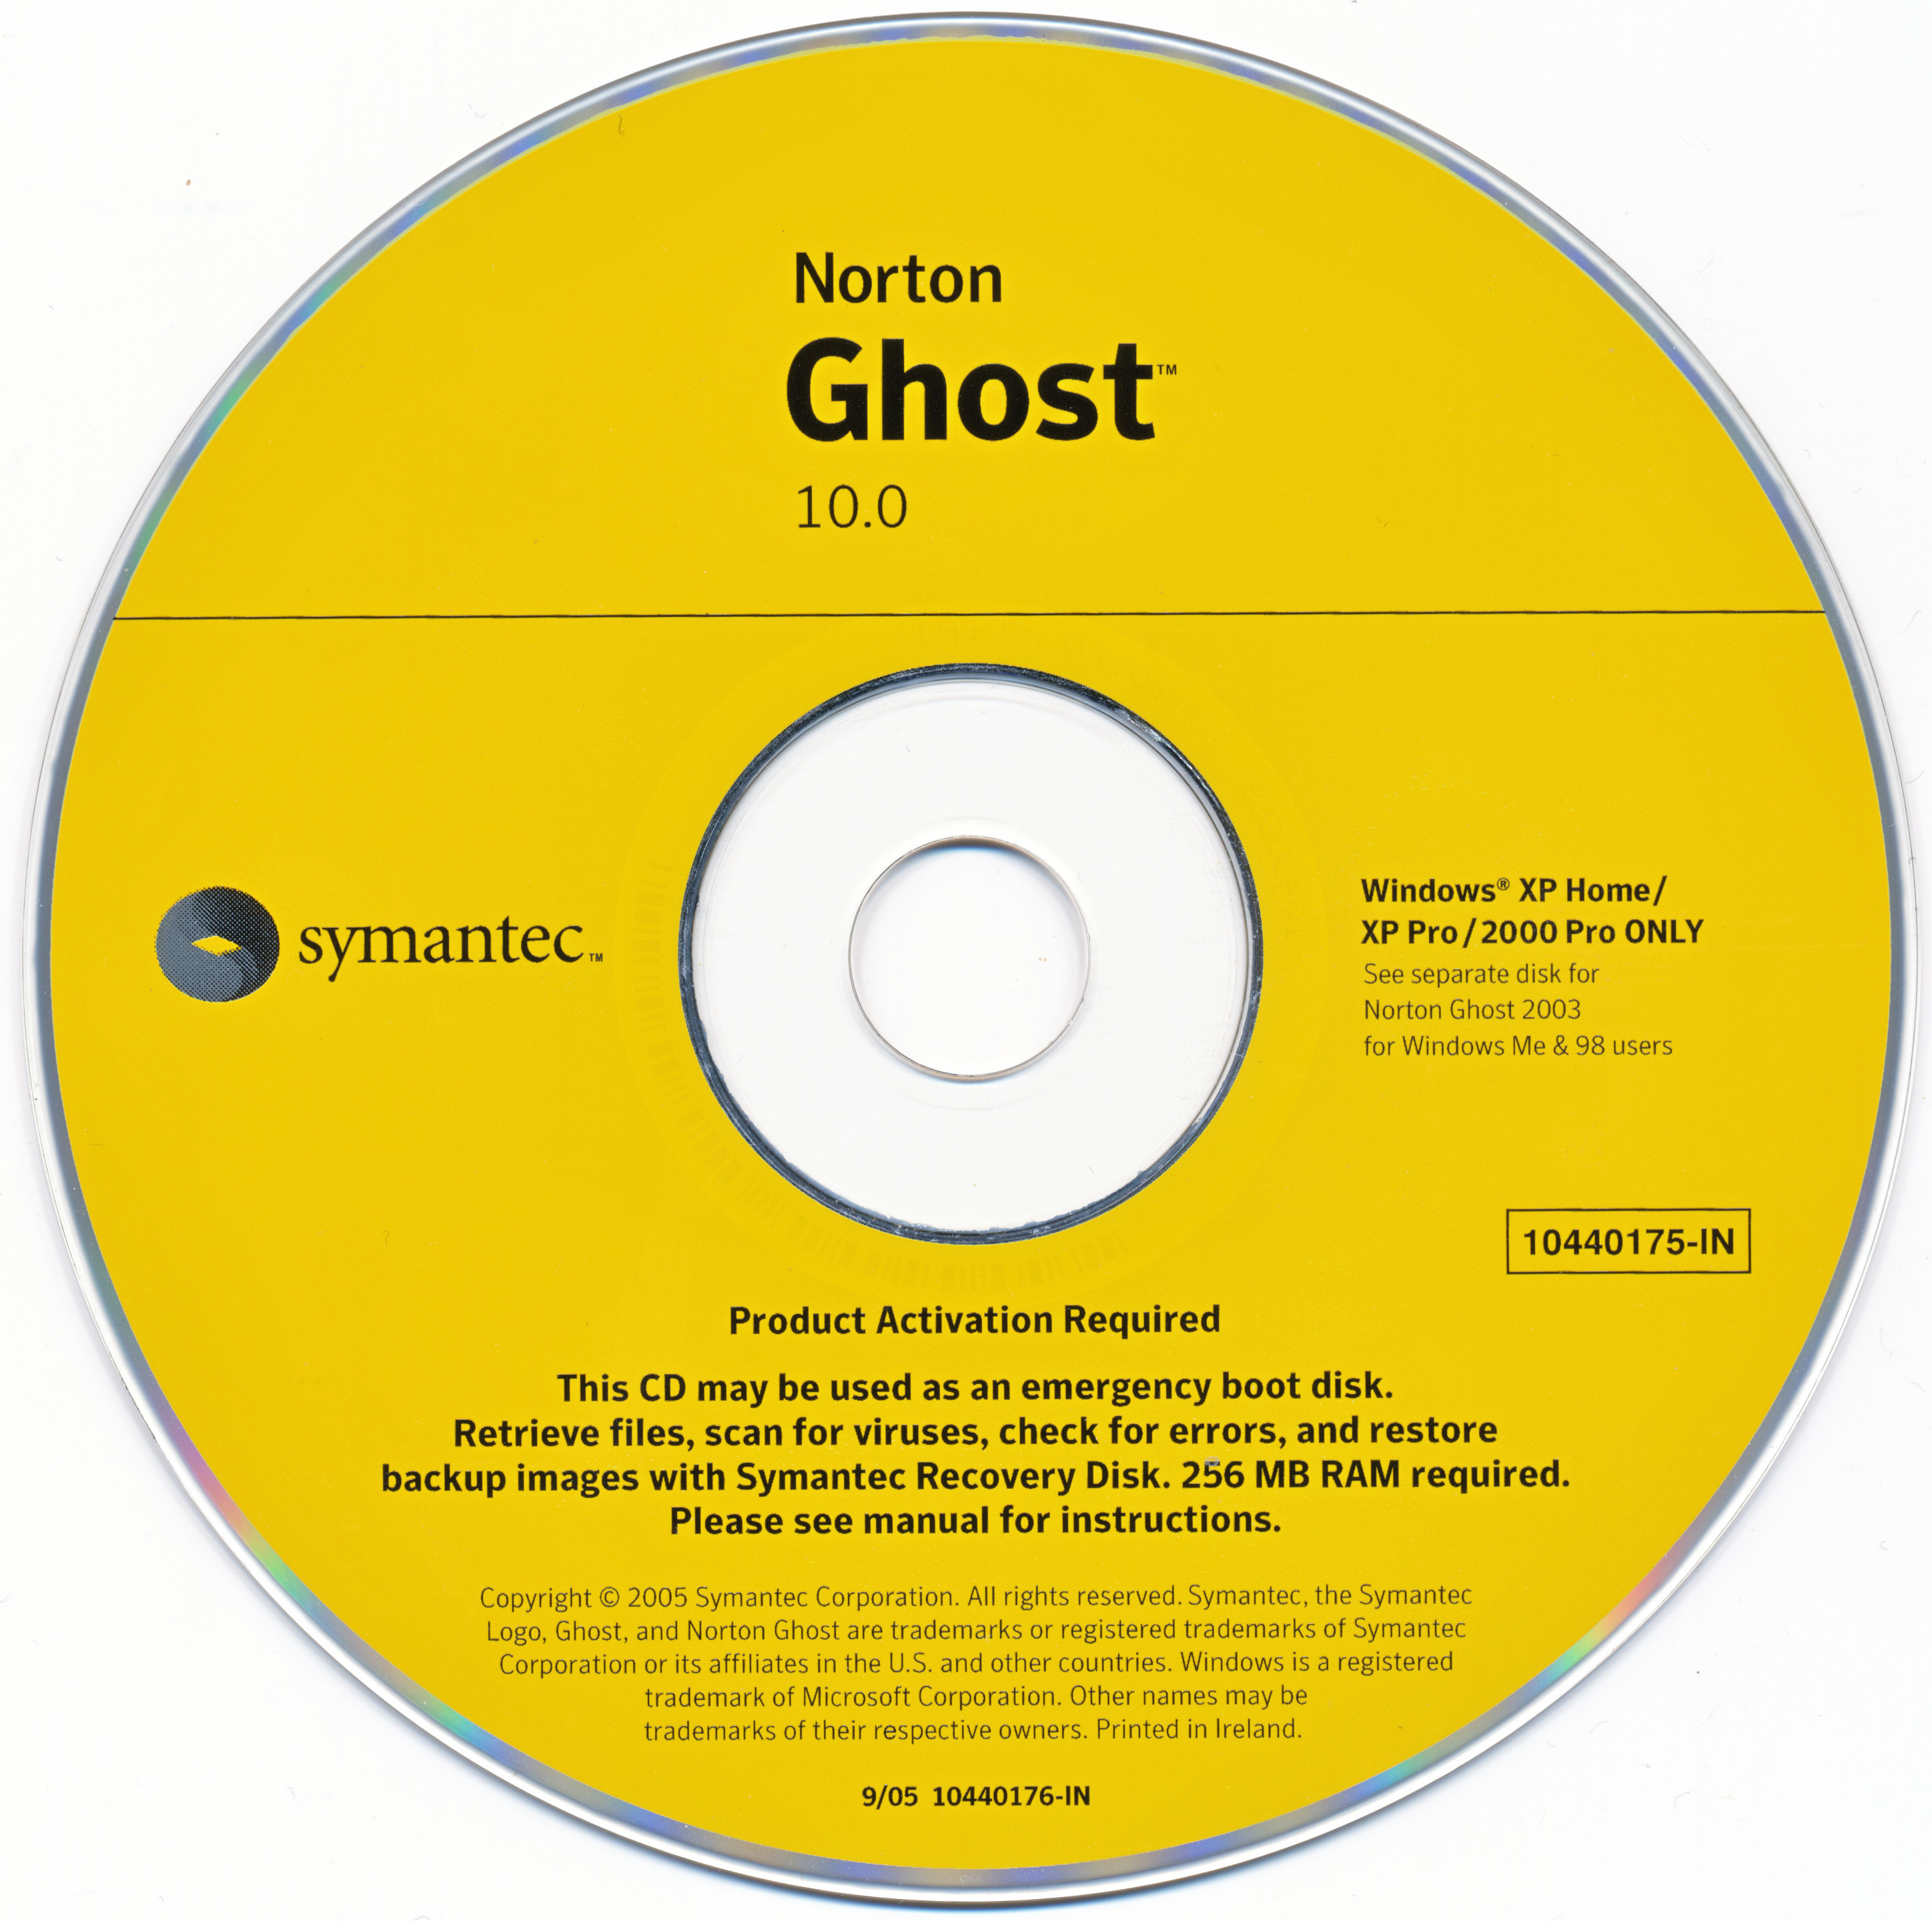 norton ghost 10_symantec recovery time disk